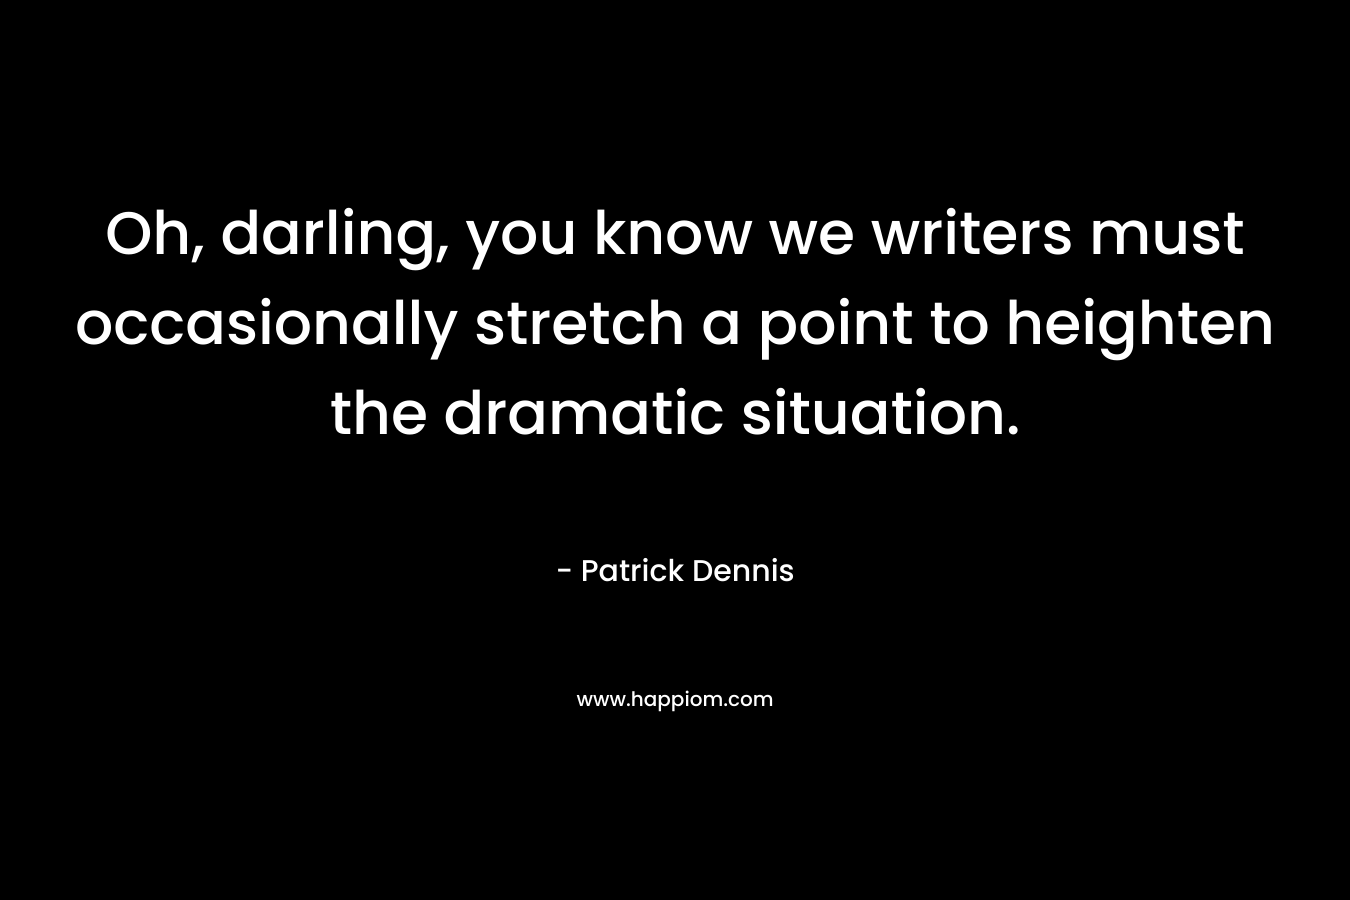 Oh, darling, you know we writers must occasionally stretch a point to heighten the dramatic situation.  – Patrick Dennis